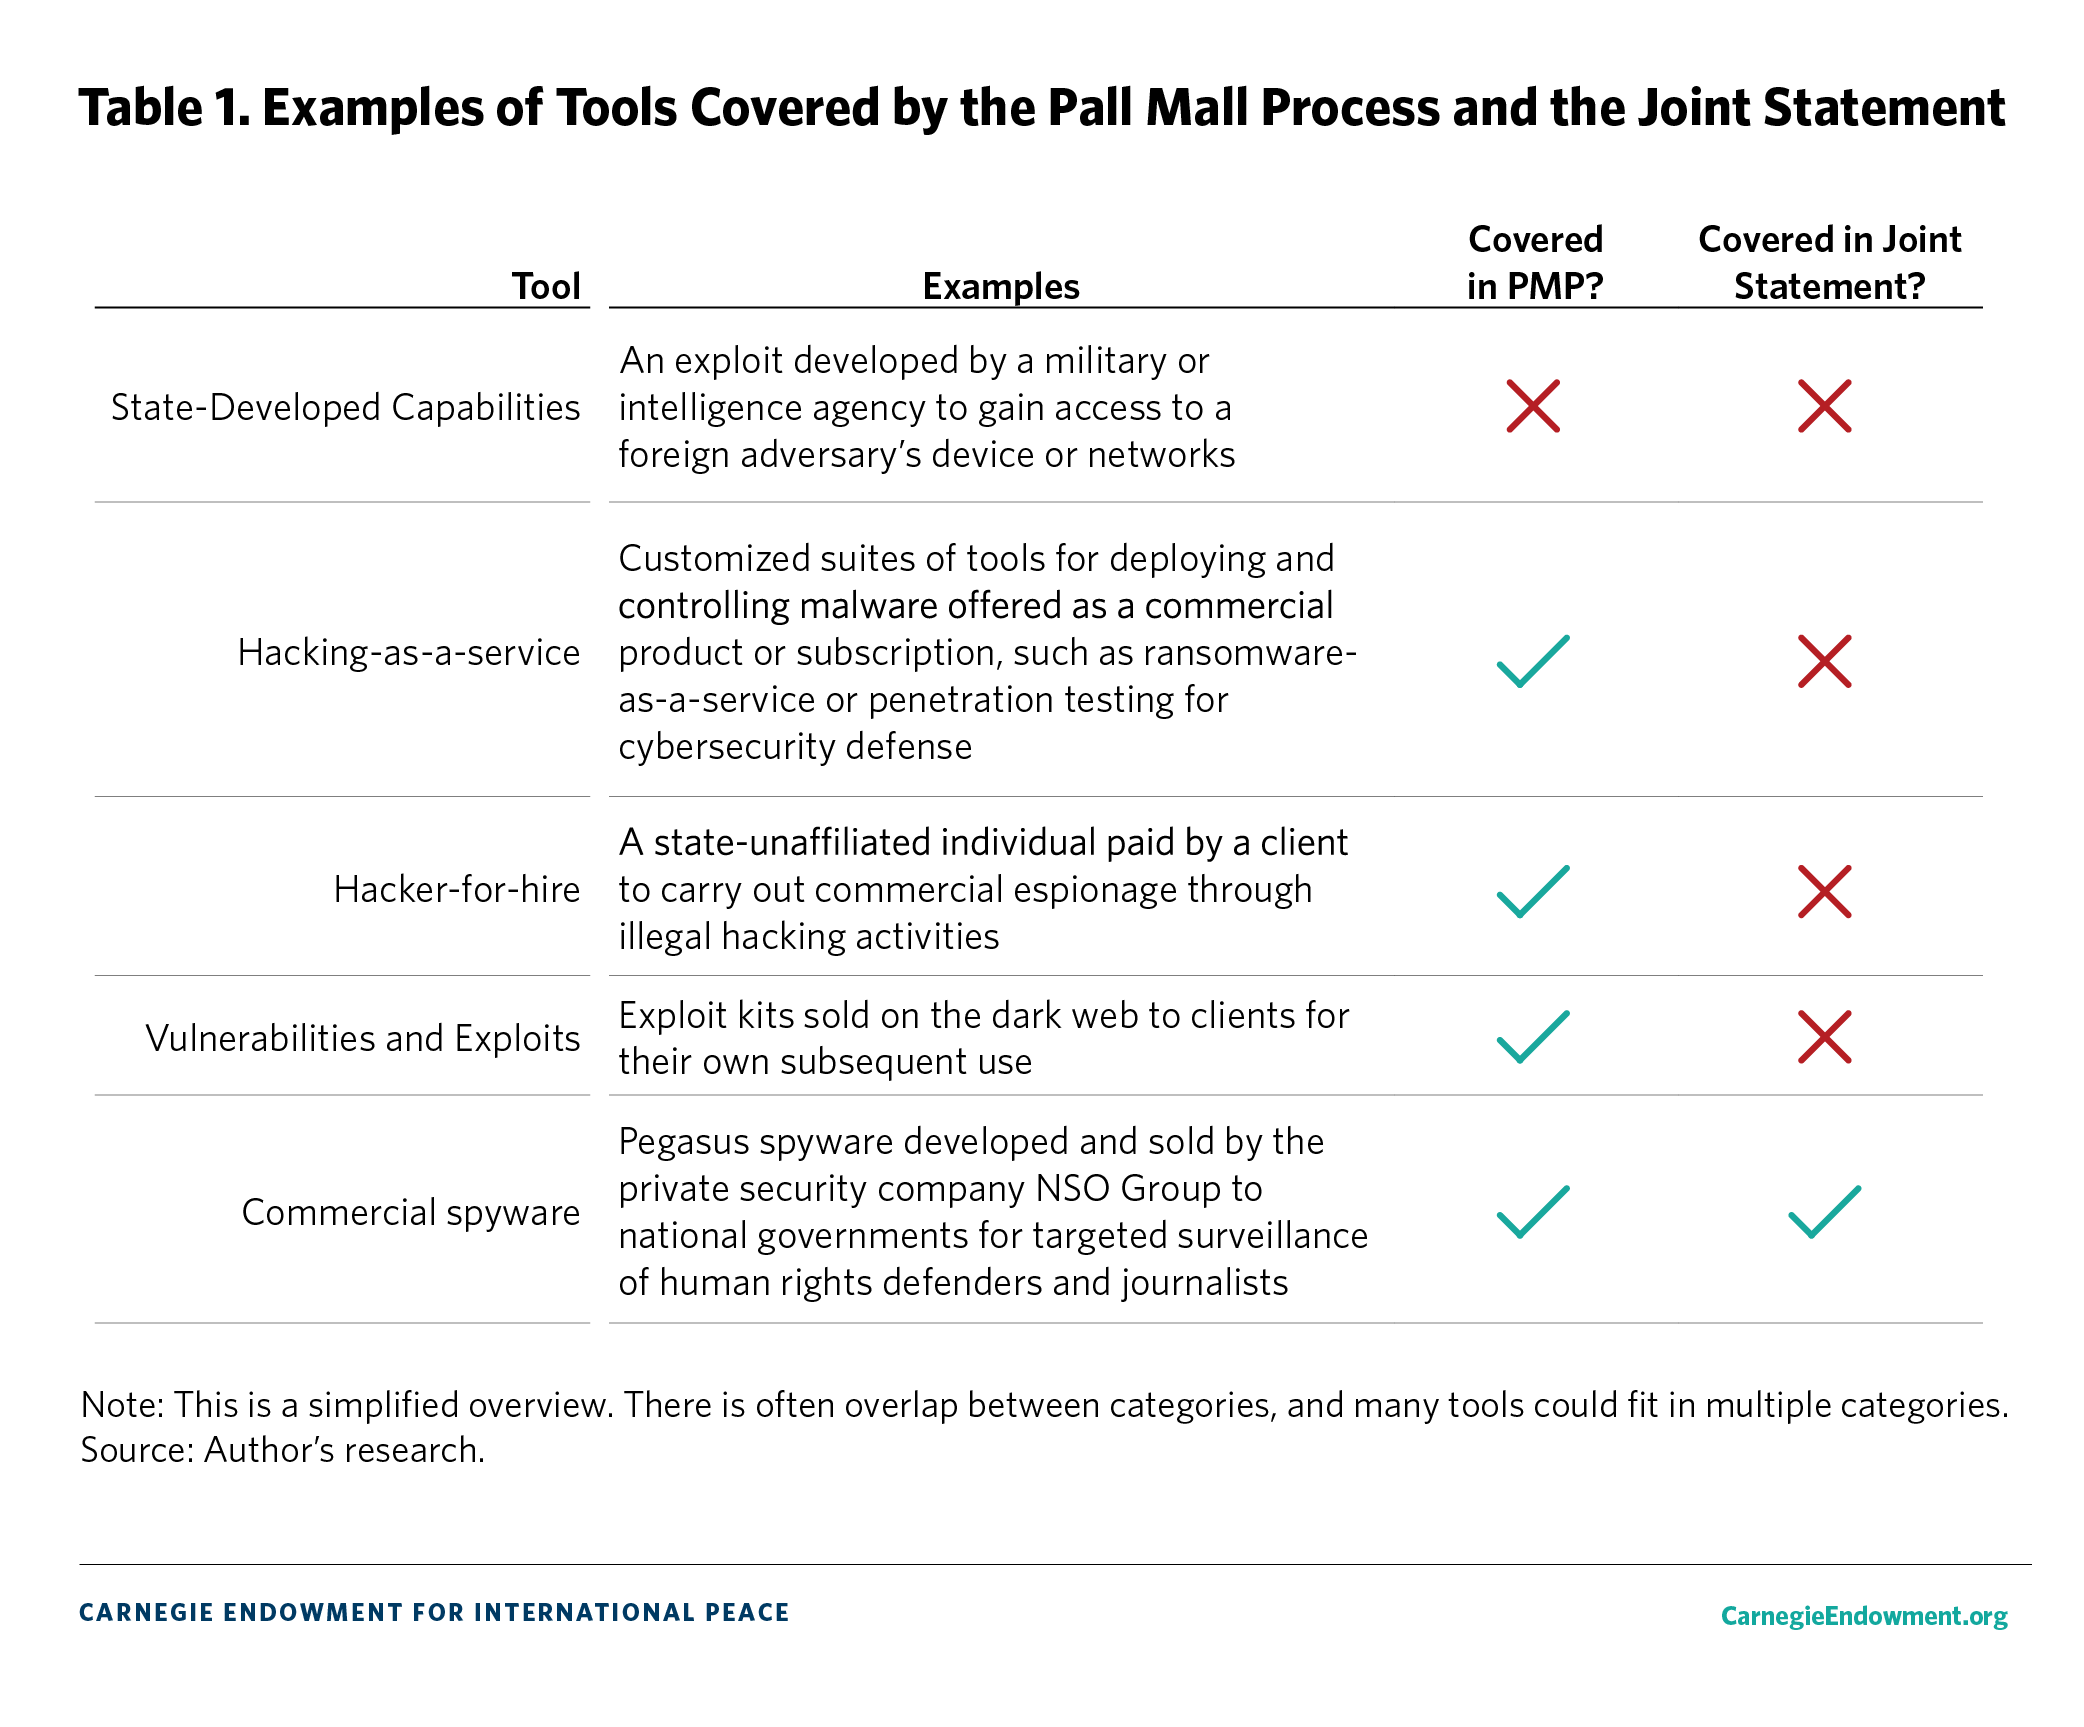 Table 1: Examples of Tools Covered by the Pall Mall Process and the Joint Statement